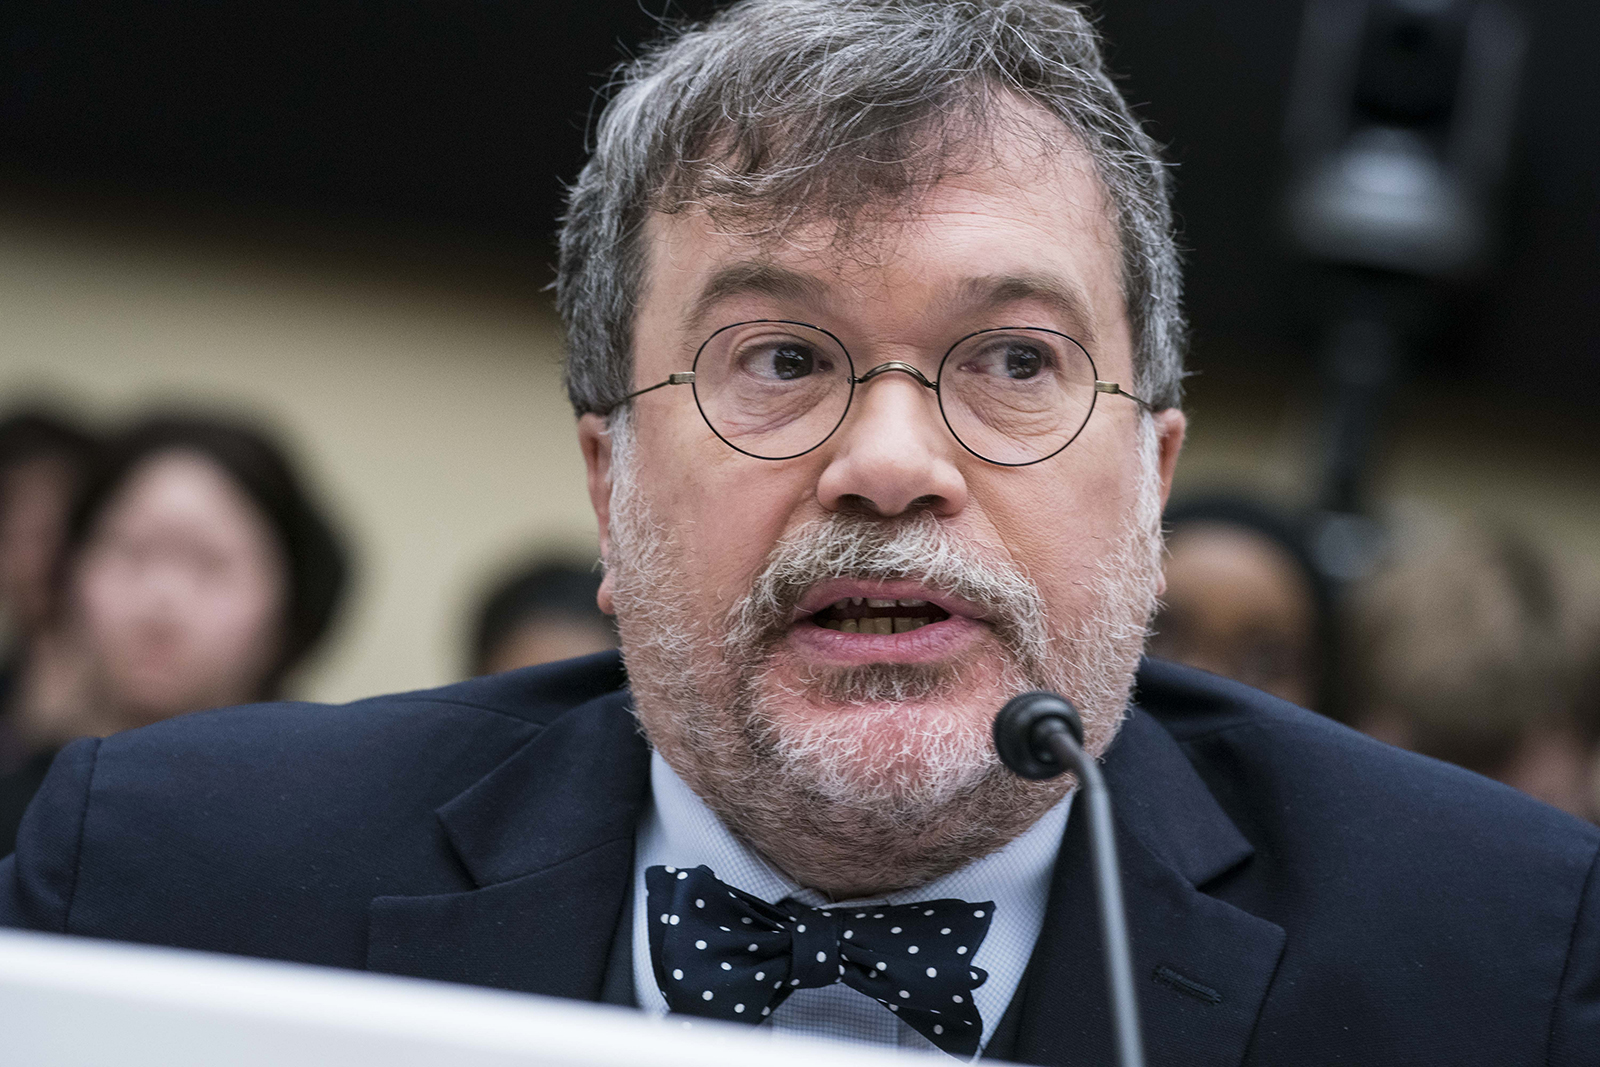 Peter Hotez, founding dean and chief of the Baylor College of Medicine National School of Tropical Medicine, speaks during a hearing on Capitol Hill in Washington, DC on March 5.